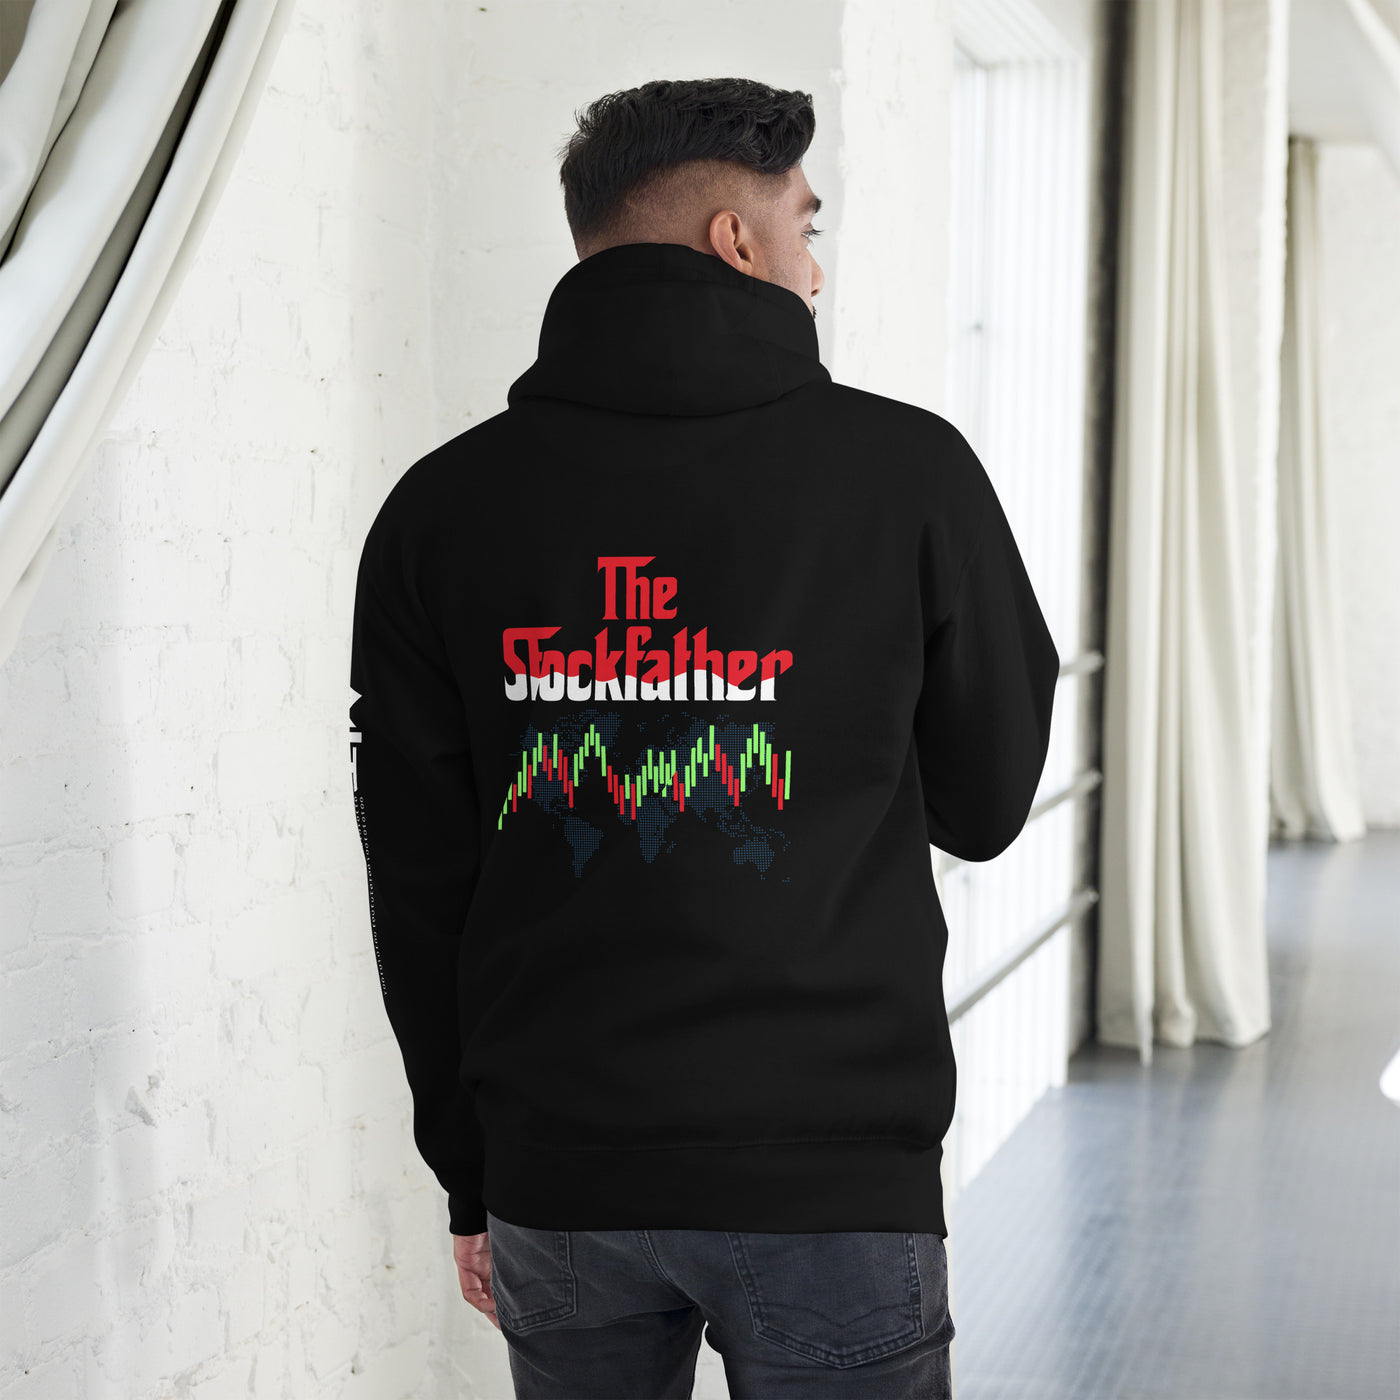 The Stockfather - Unisex Hoodie ( Back Print )